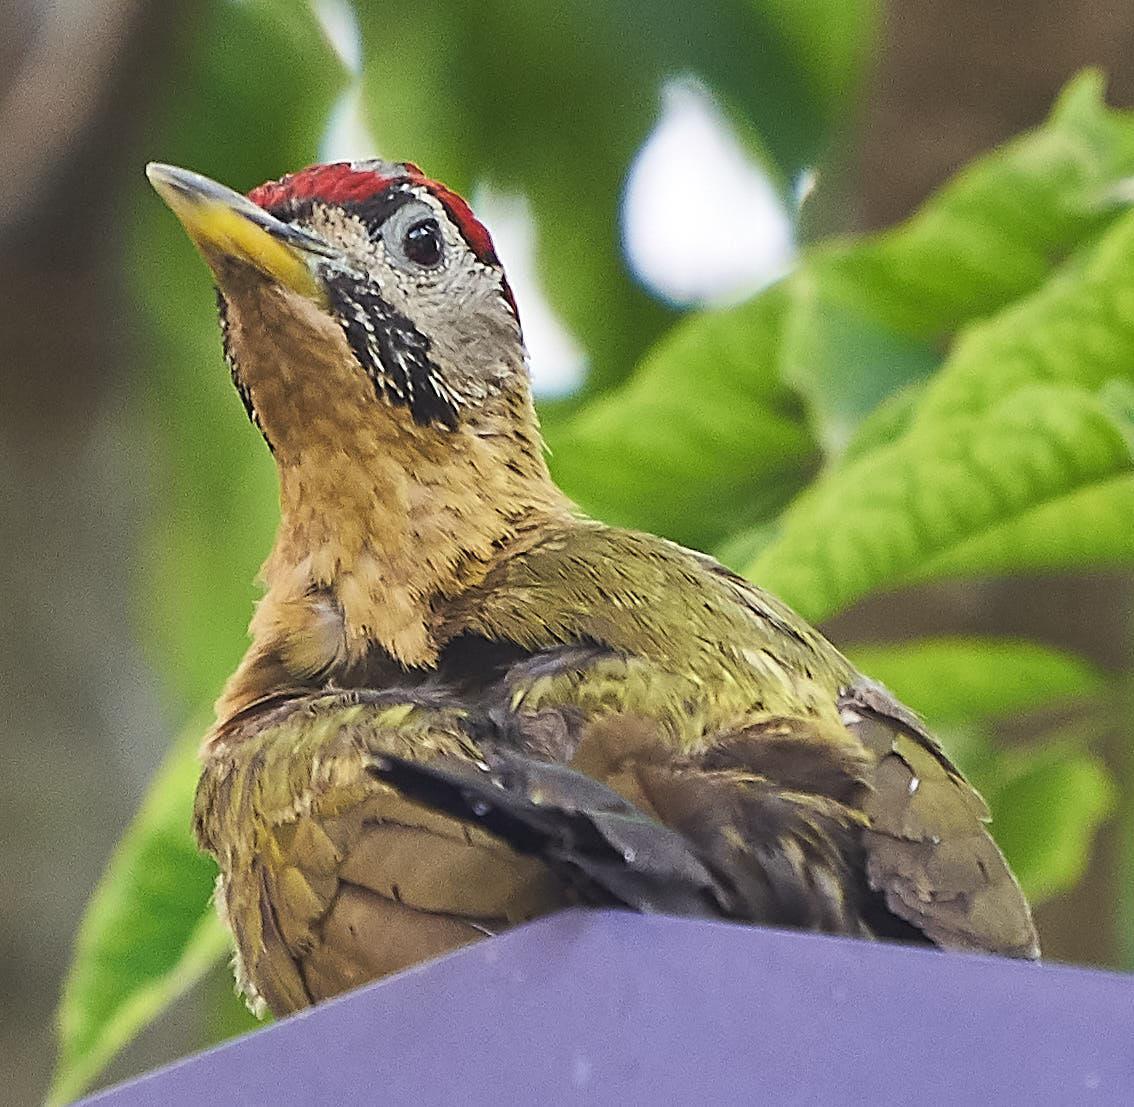 Laced Woodpecker Photo by Steven Cheong